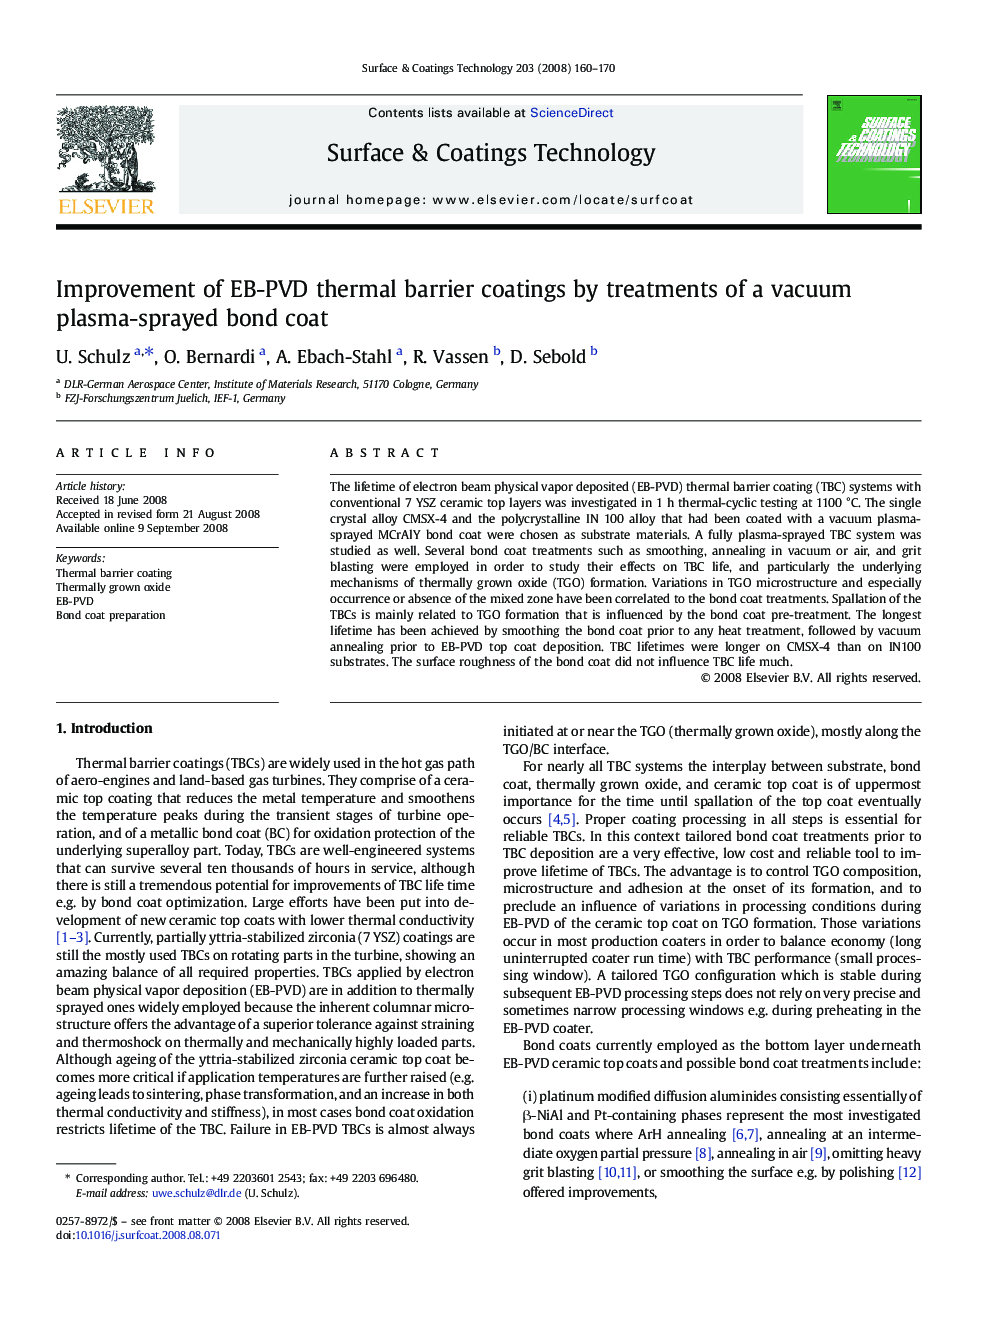 Improvement of EB-PVD thermal barrier coatings by treatments of a vacuum plasma-sprayed bond coat